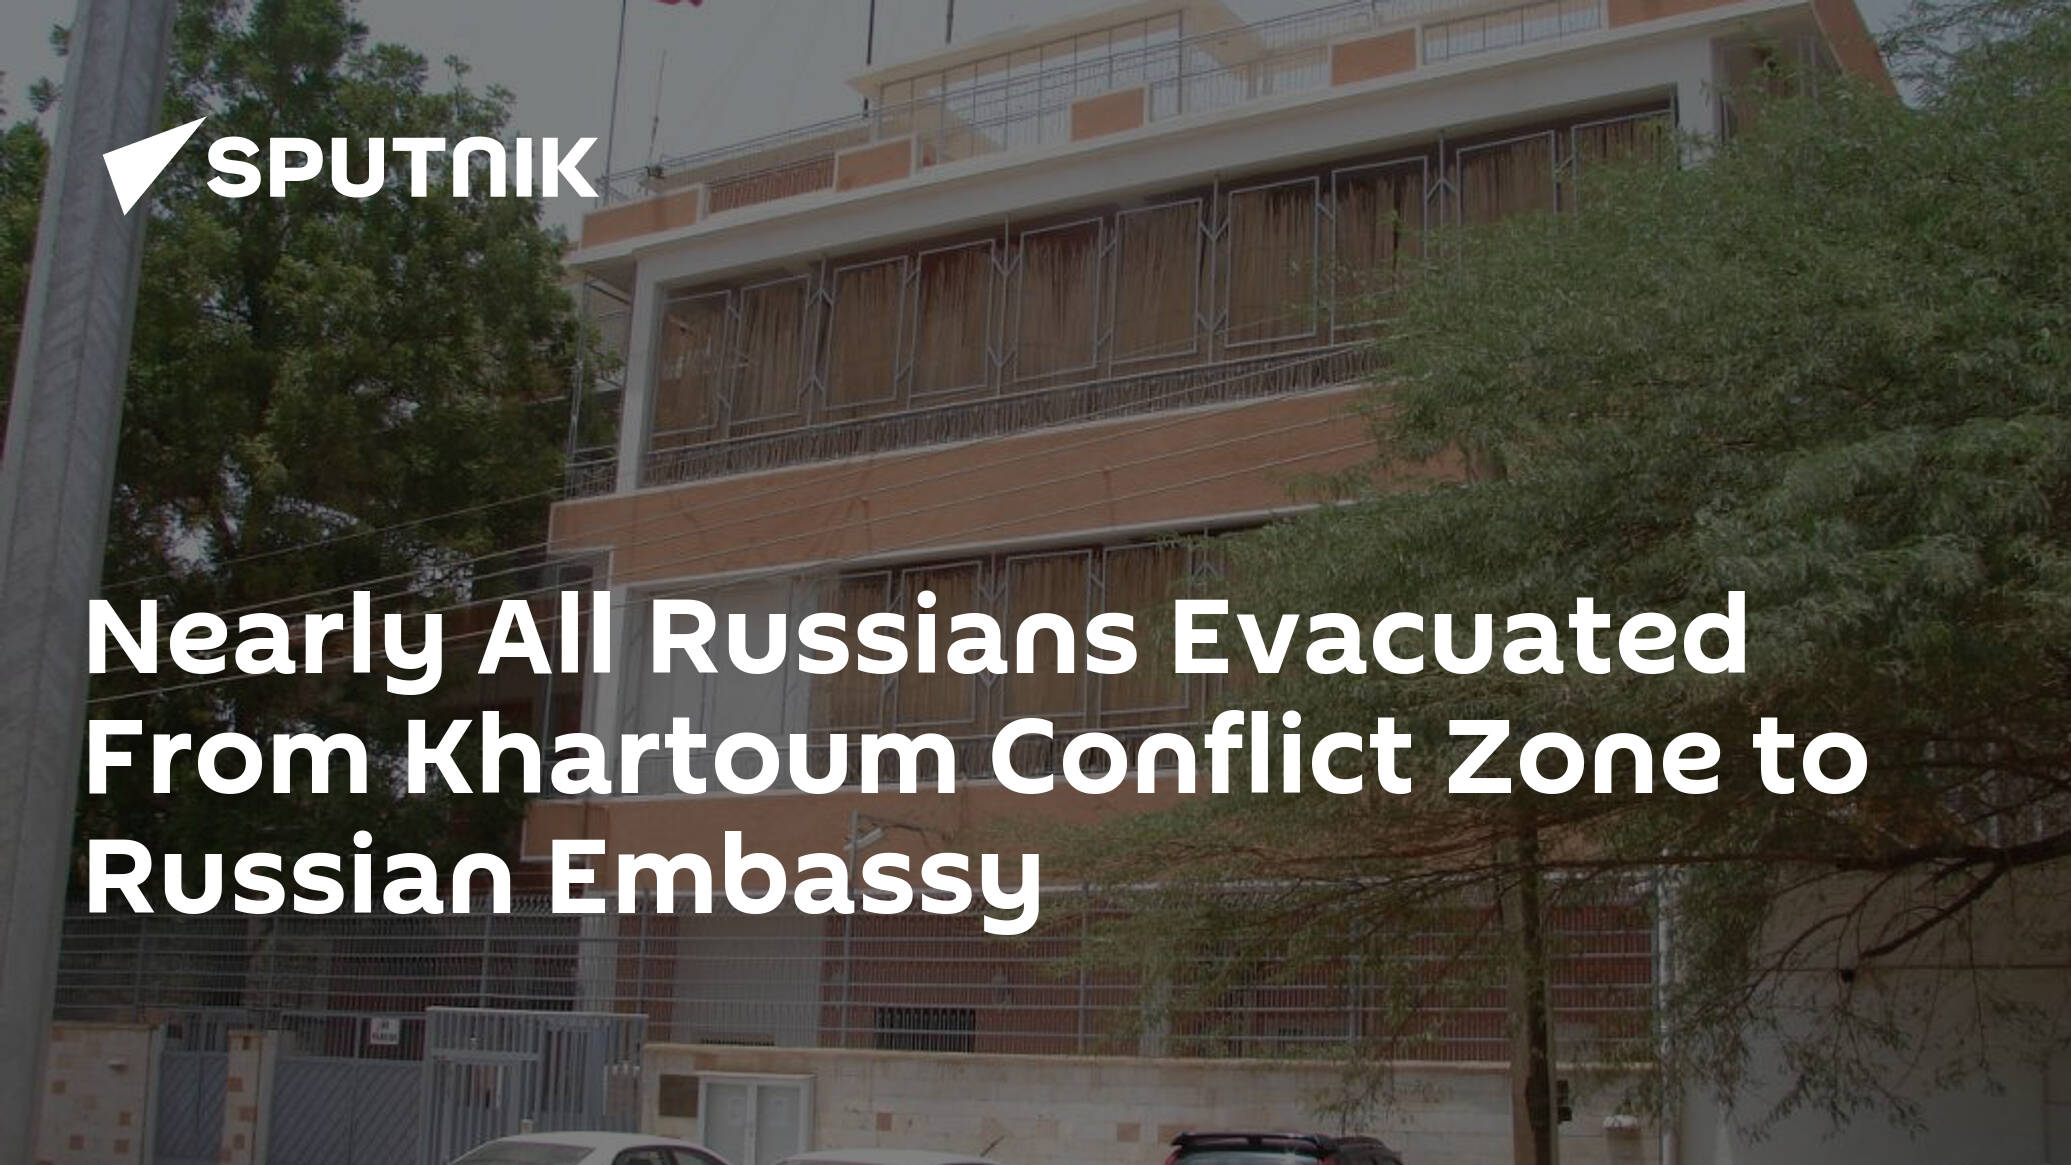 Nearly All Russians Evacuated From Khartoum Conflict Zone to Russian Embassy